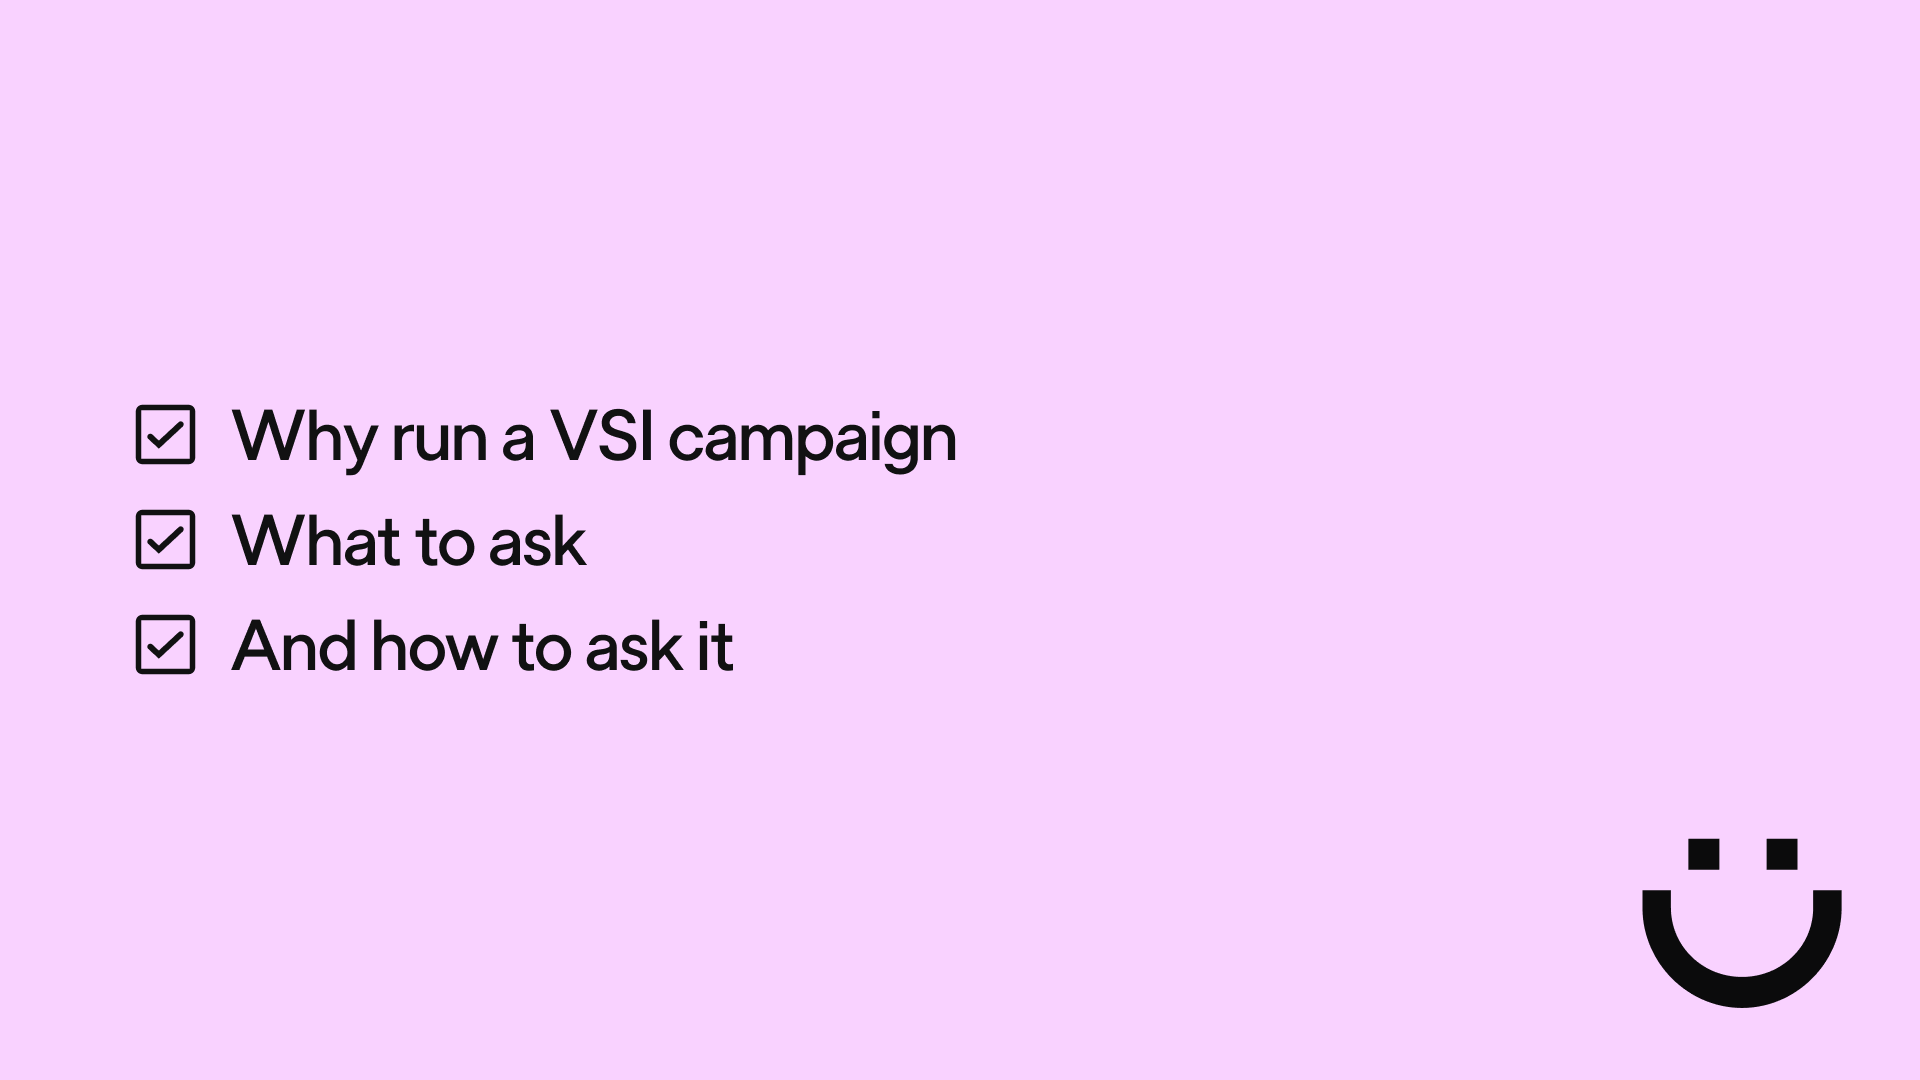 Checklist that reads Why run a VSI campaign, What to ask, And how to ask it, with each item checked off. The Dandi smiley is in the bottom right corner.